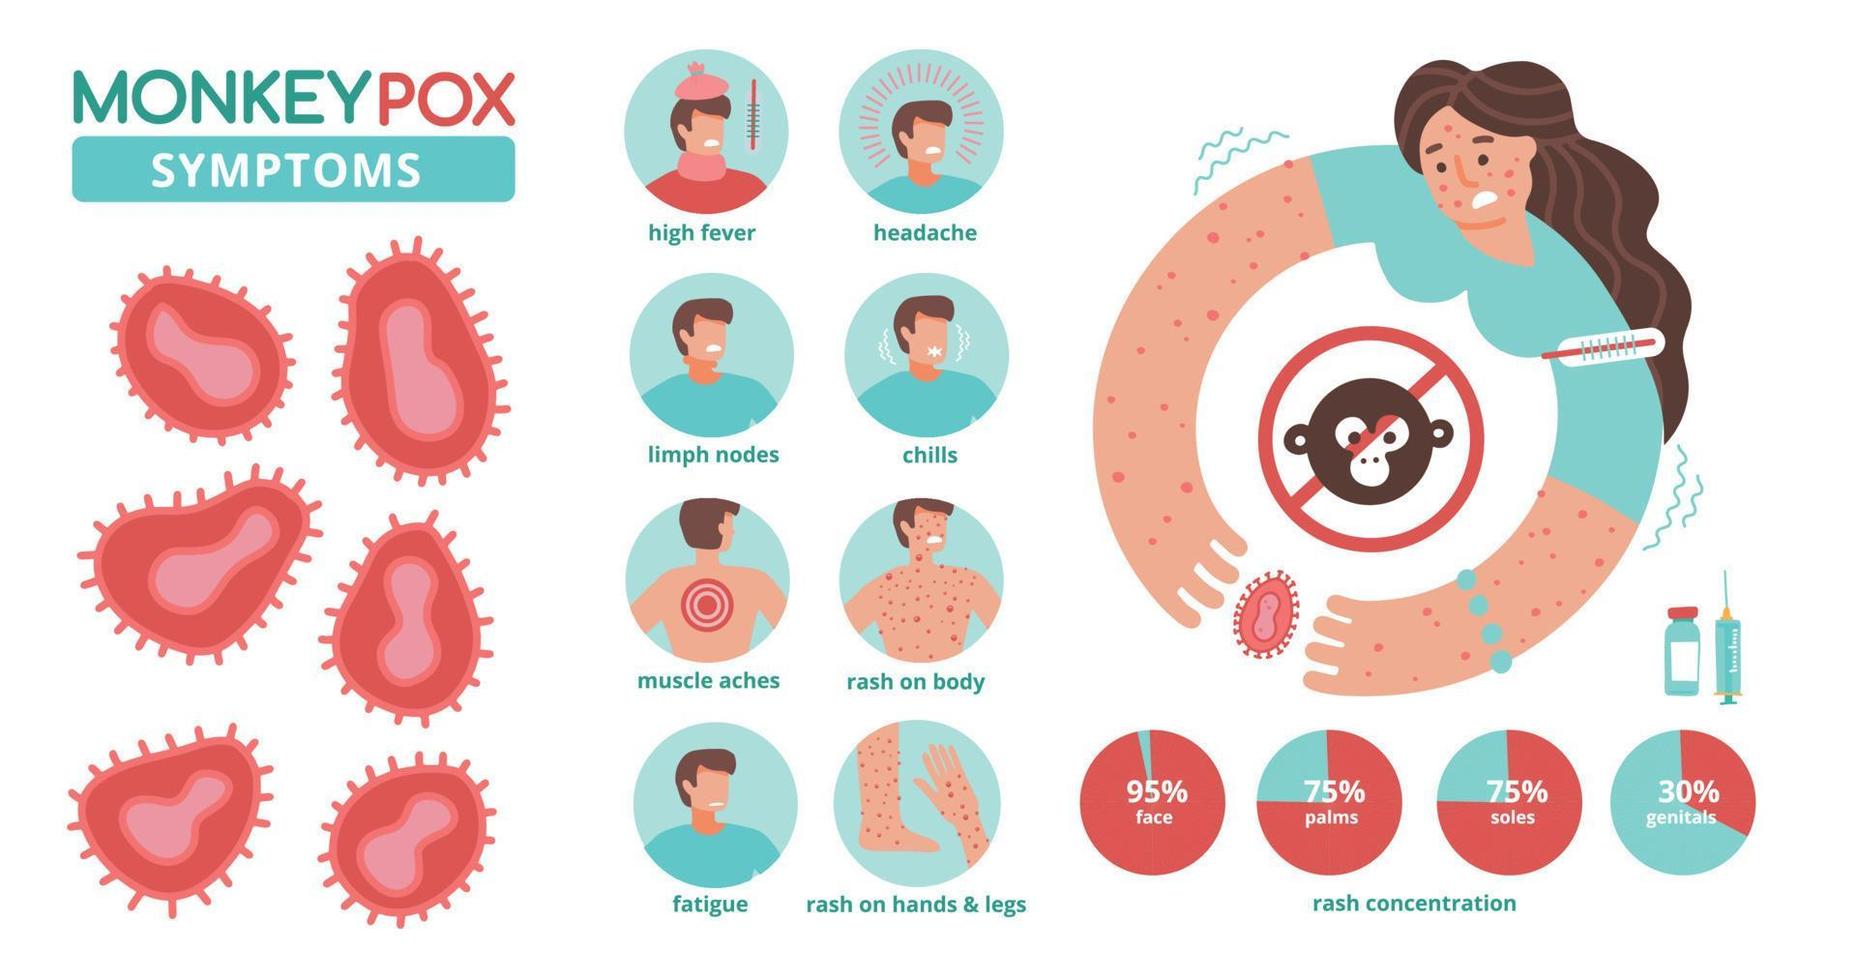 Monkeypox virus symptoms infographics. New orthopox virus outbreak worldwide spreading. Detailed info for people awareness in human diseases infection. Medical concept. Flat vector illustration.